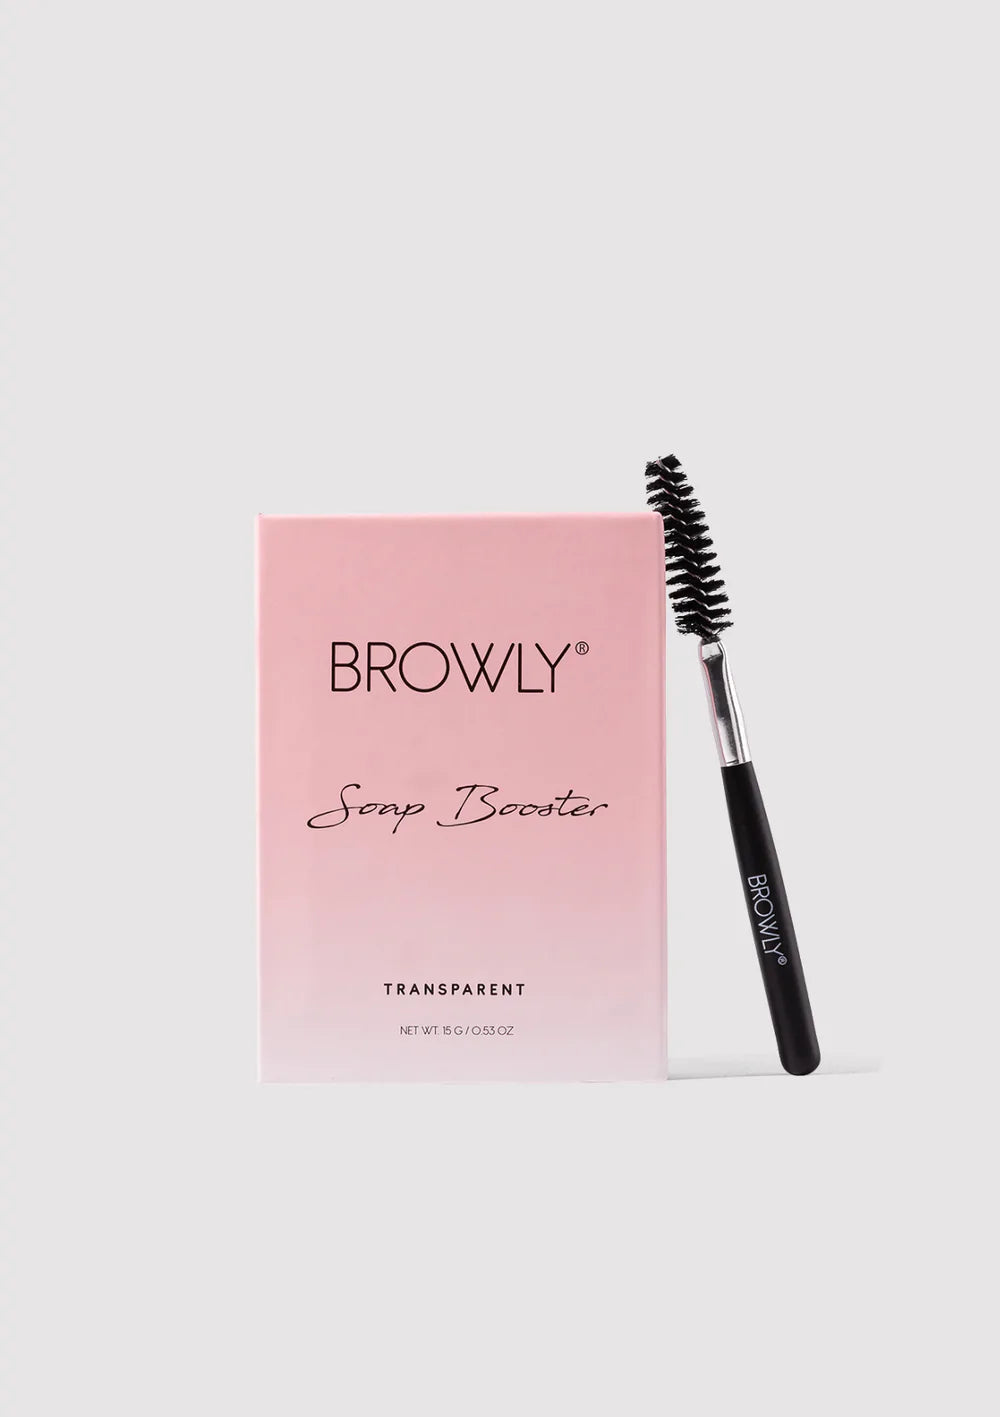 Browly Browsoap